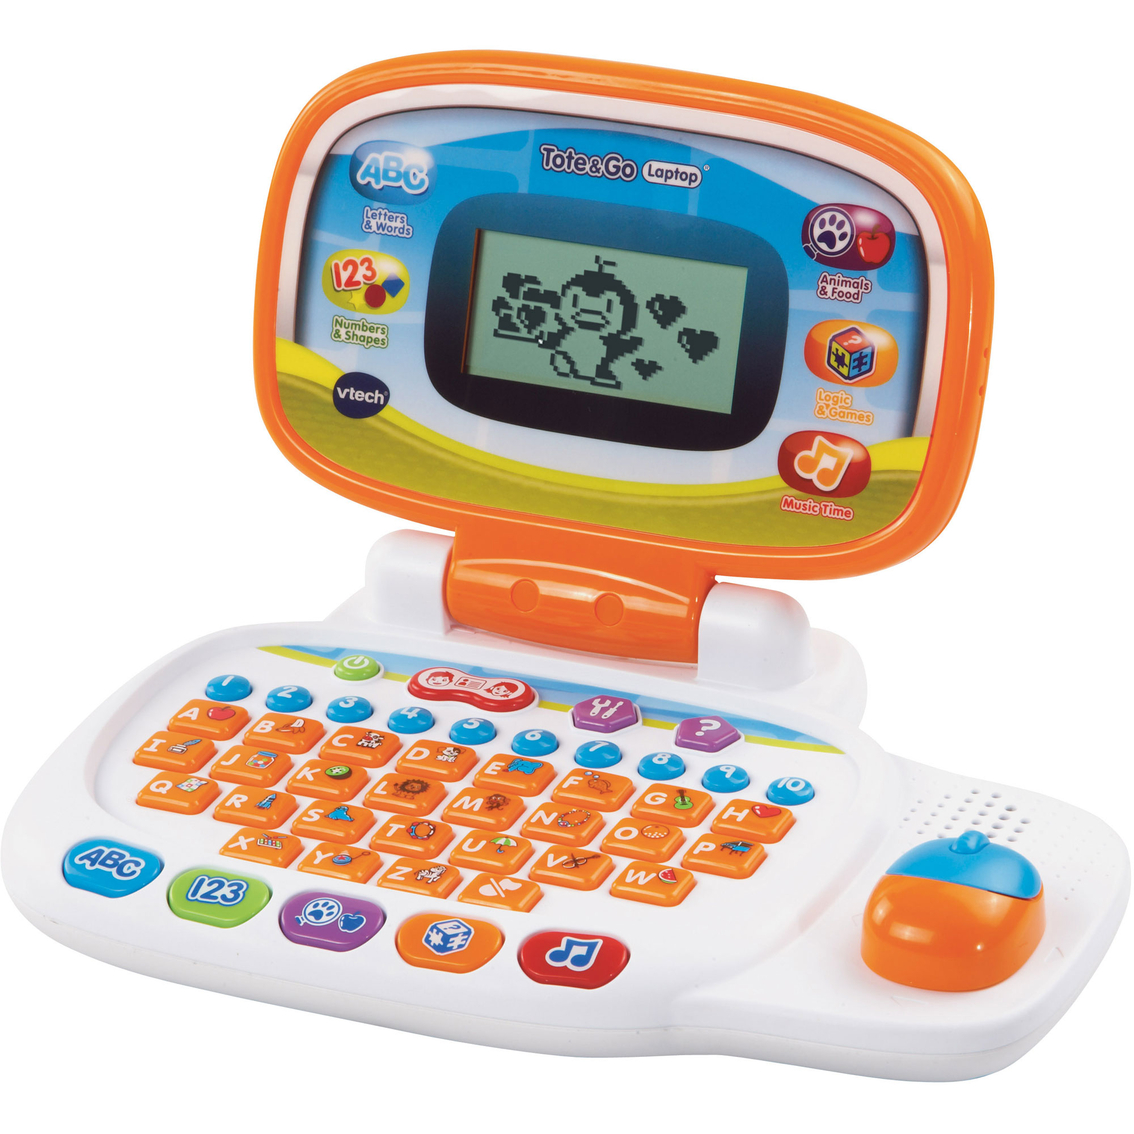 Vtech Tote And Go Laptop on eBid United States